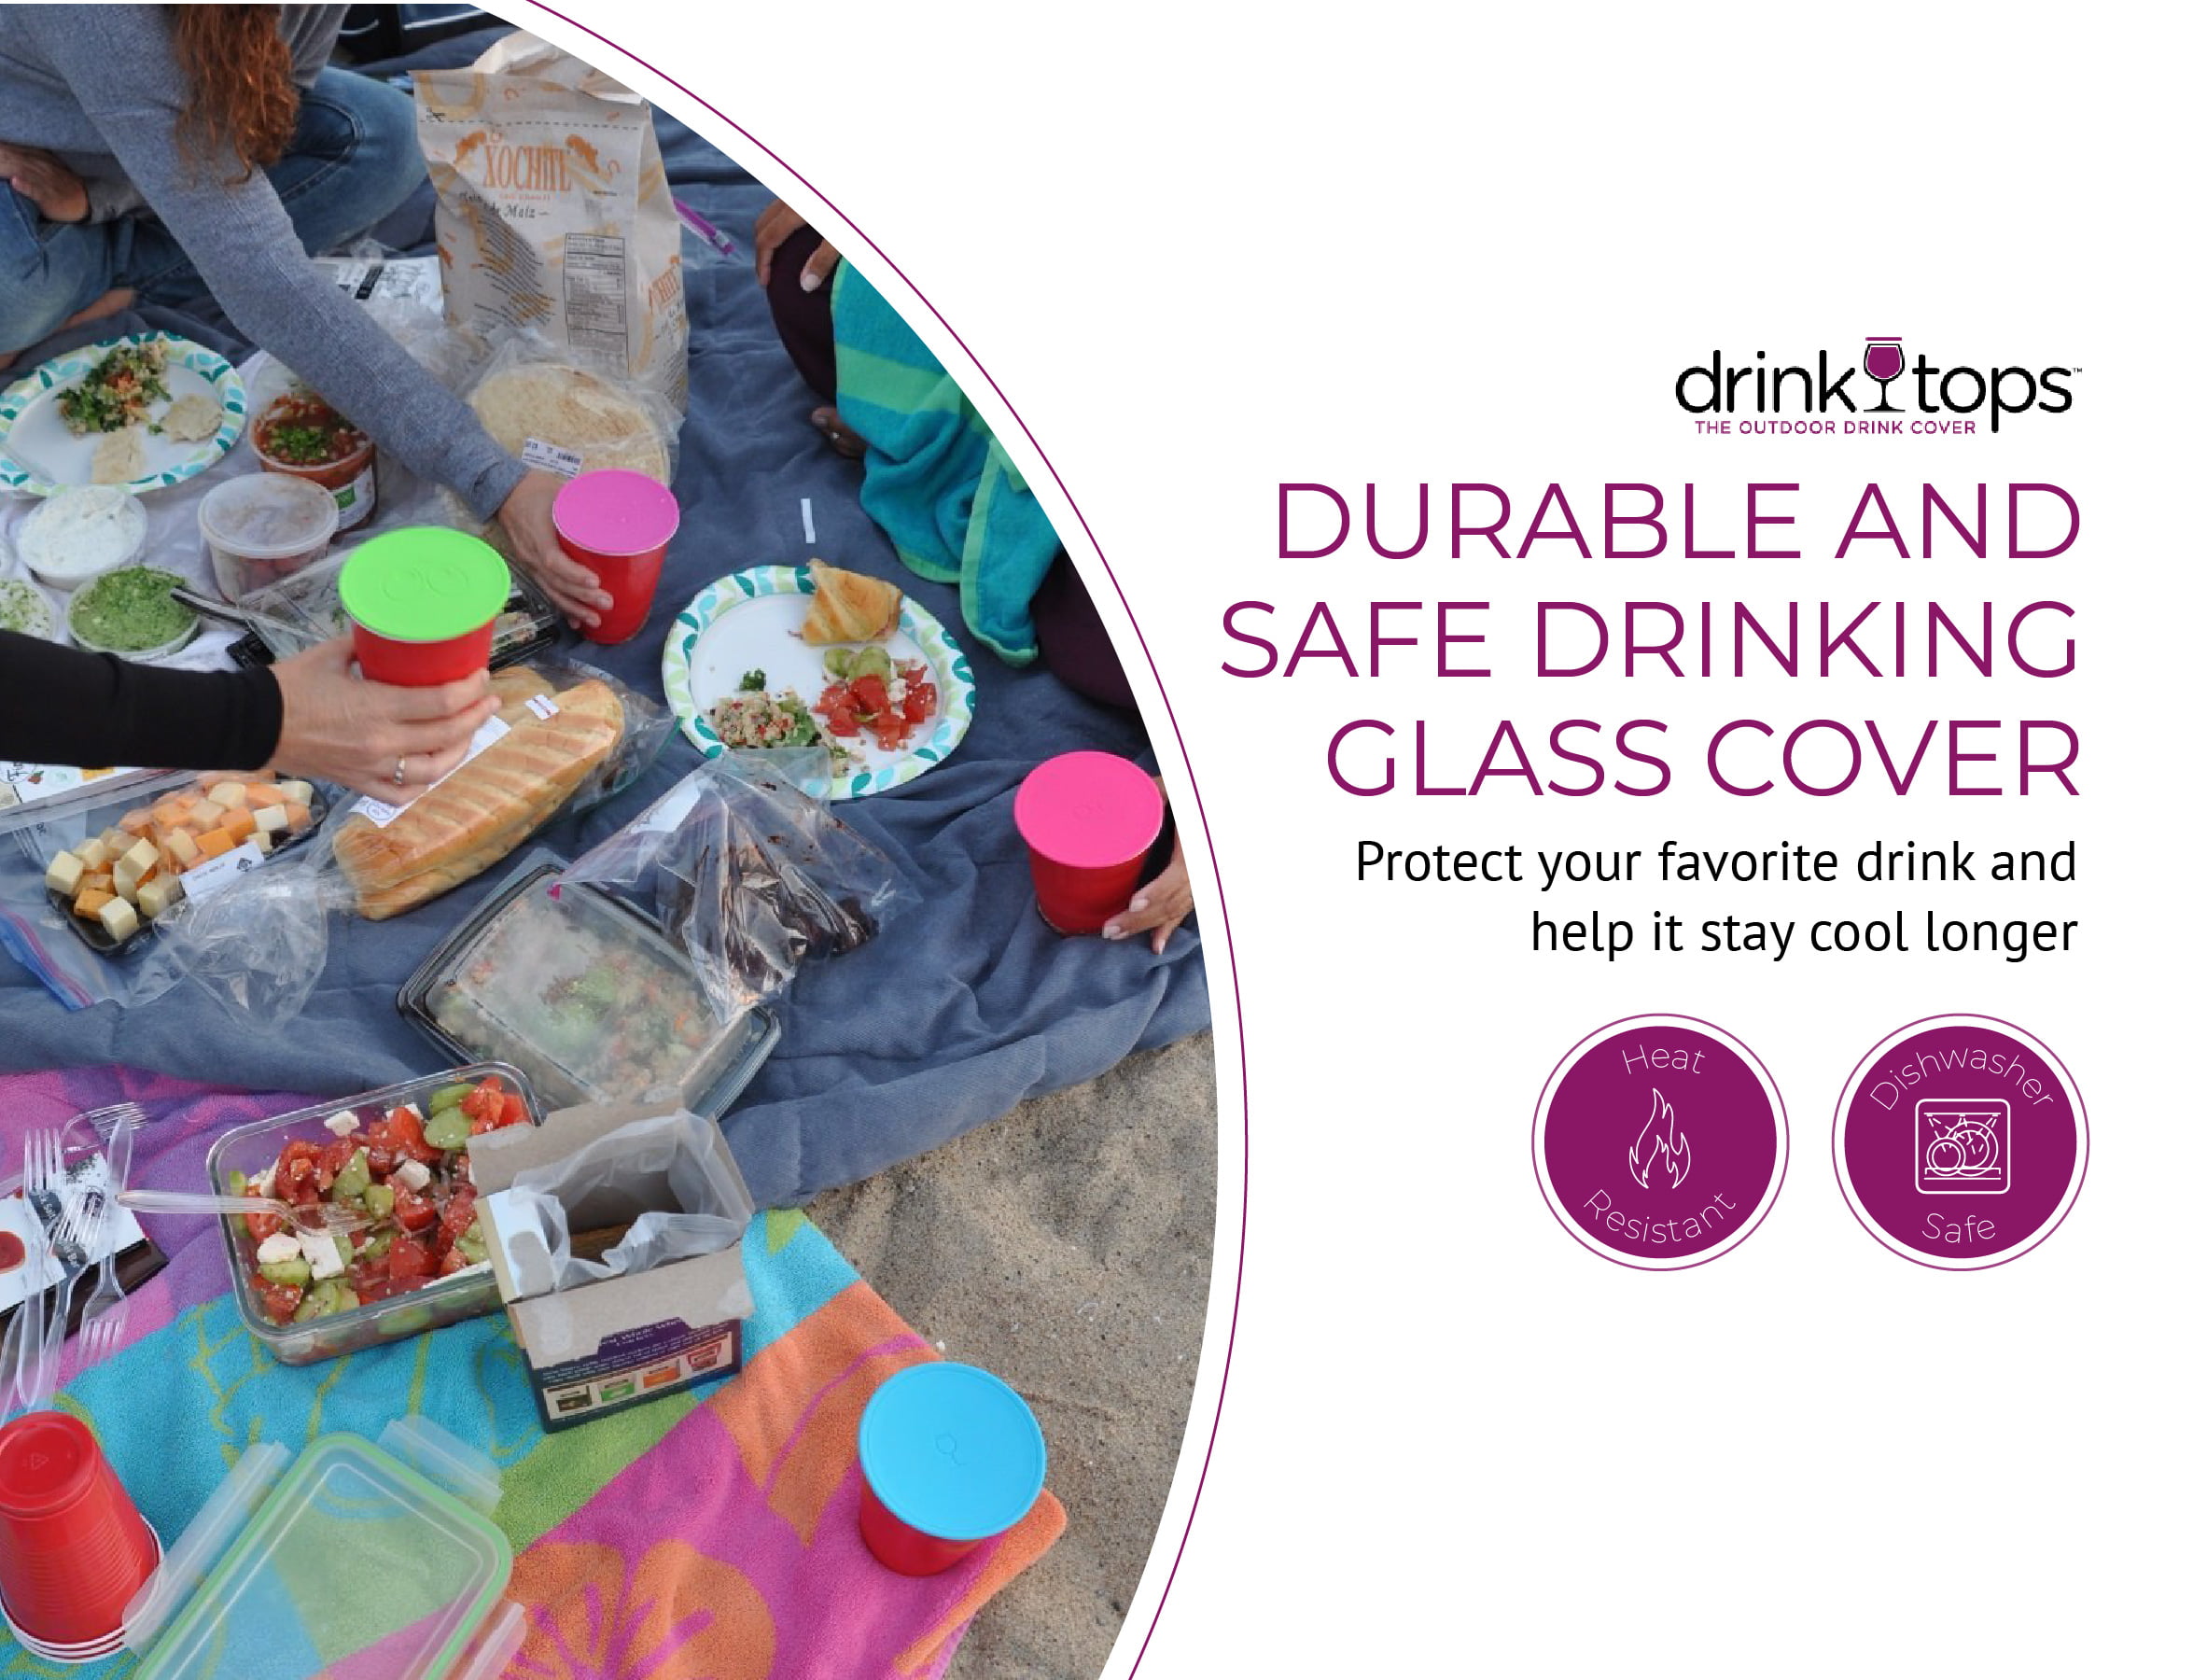 A nightcap #drinkcover is a #great way to #protect your #drinks! Code